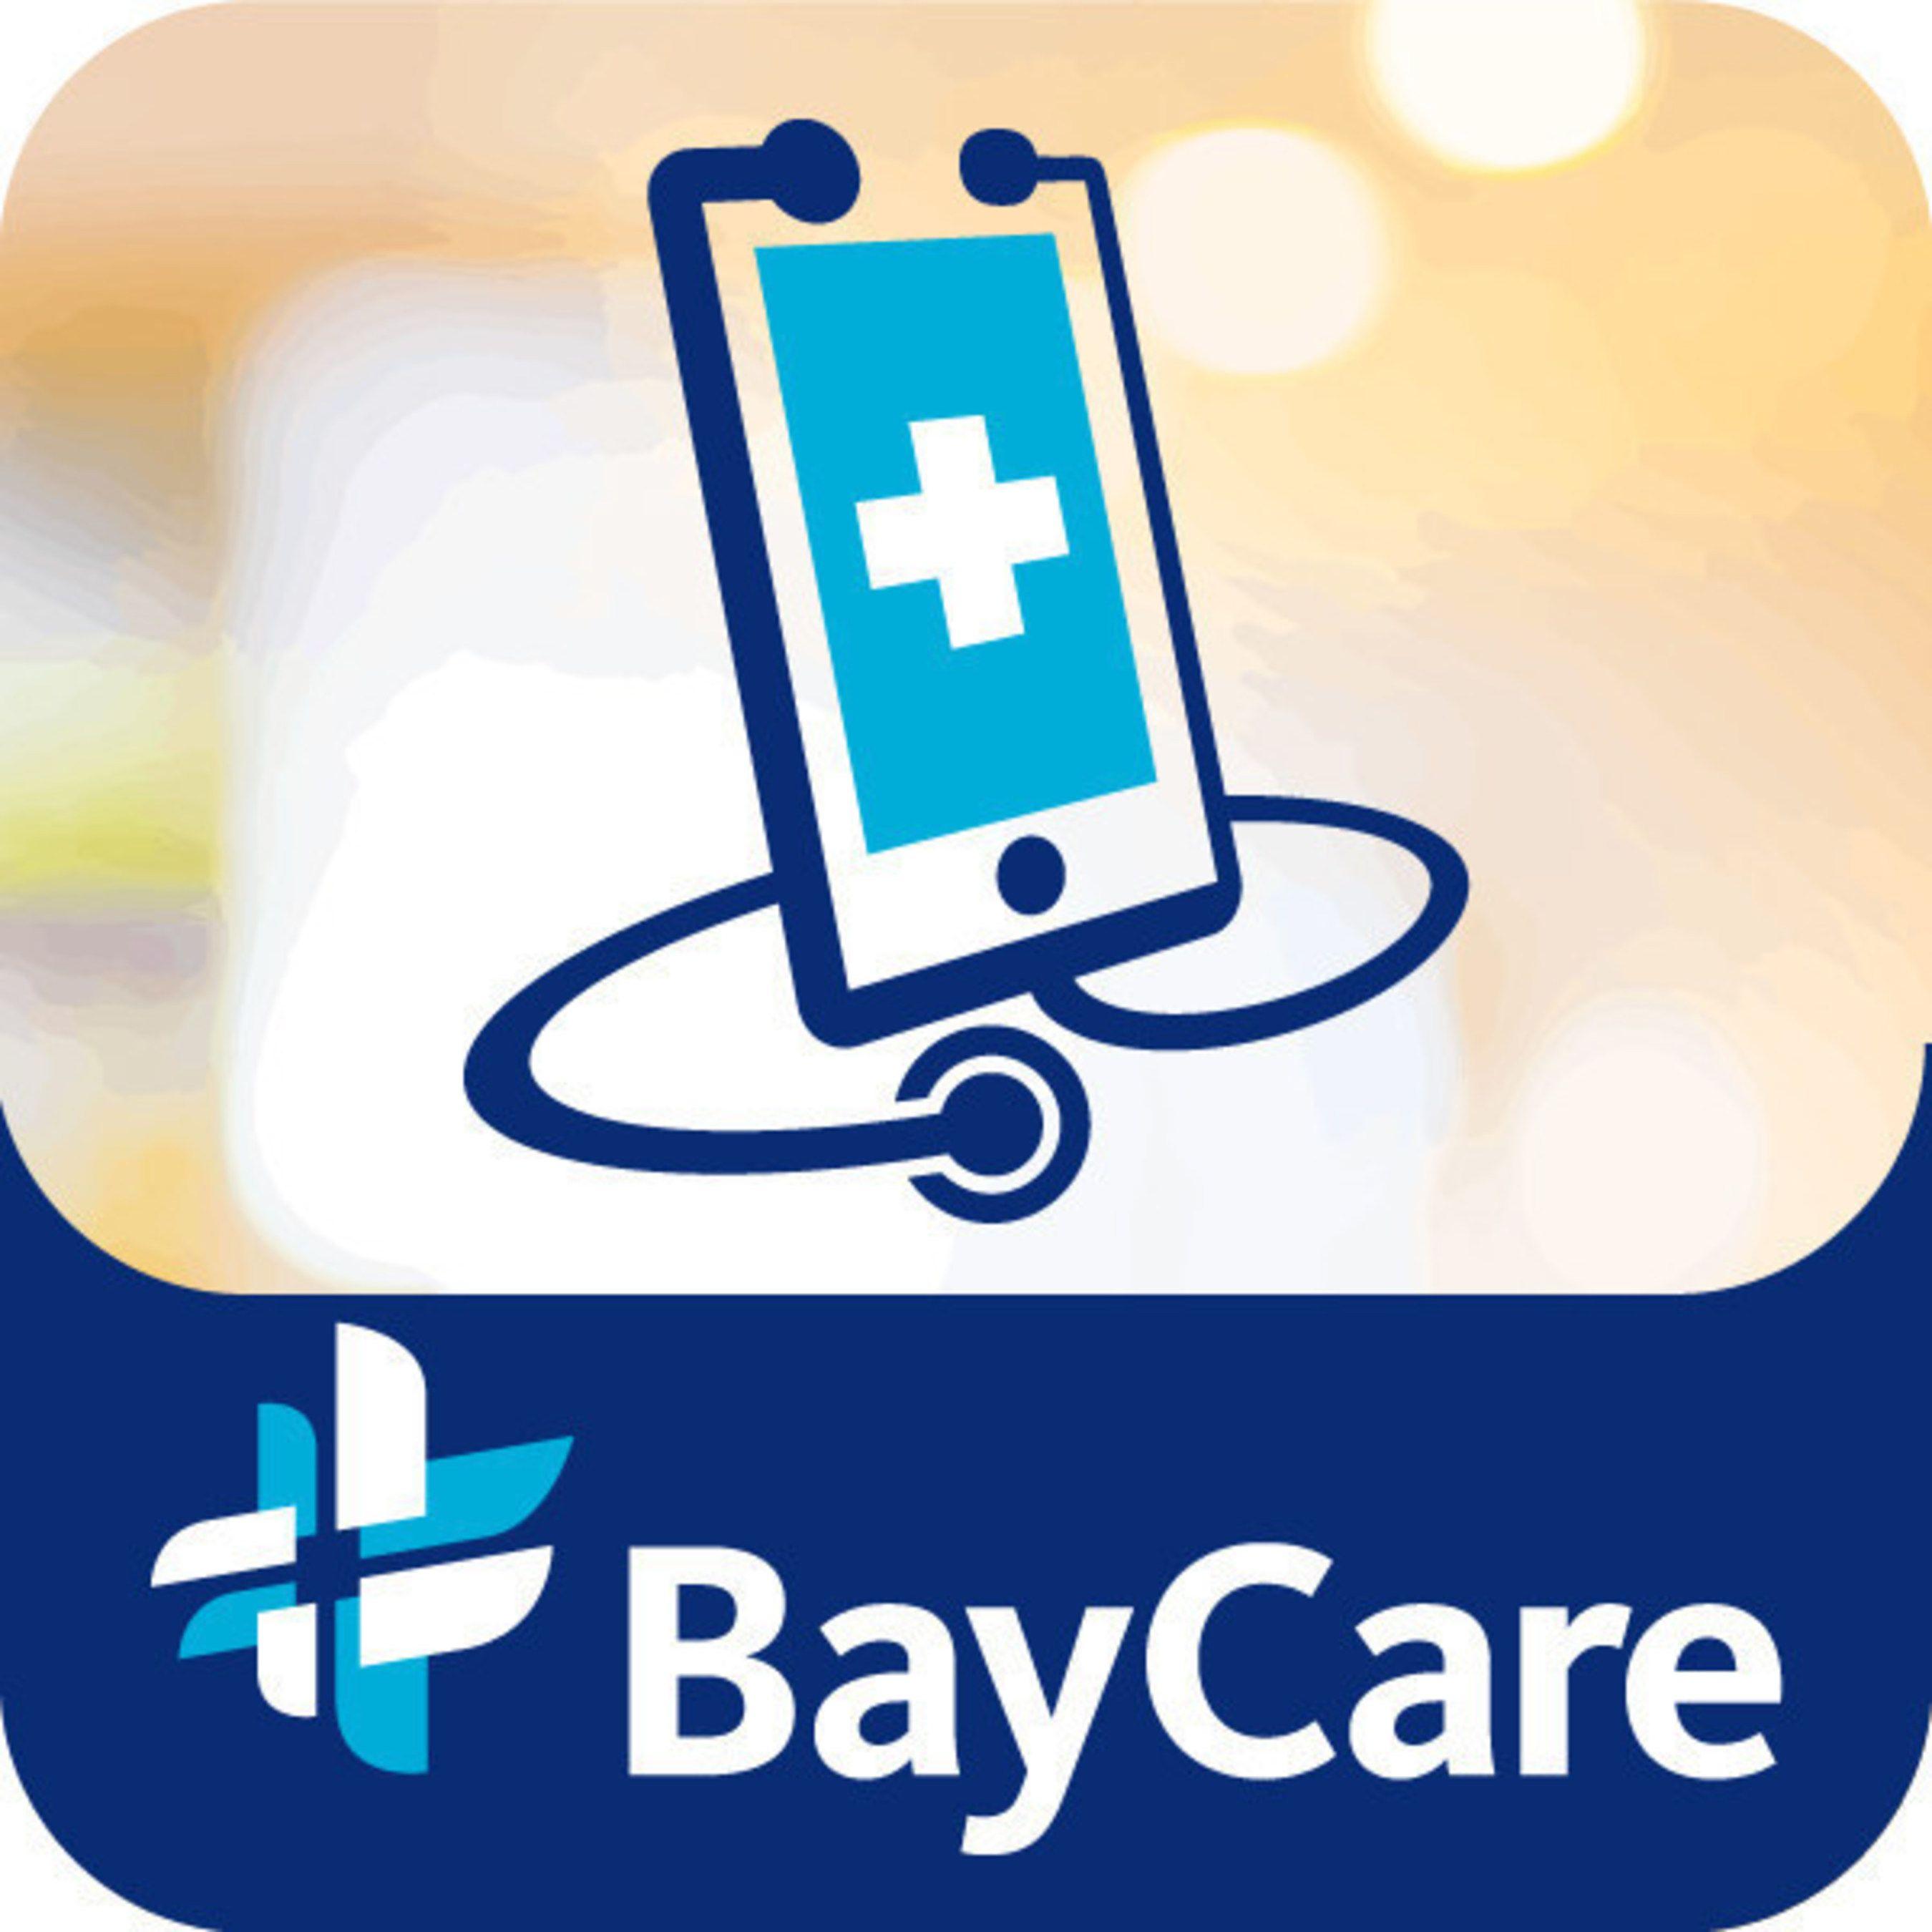 BayCare Logo - BayCare Continues to Use Technology to Expand Access to Health Care ...